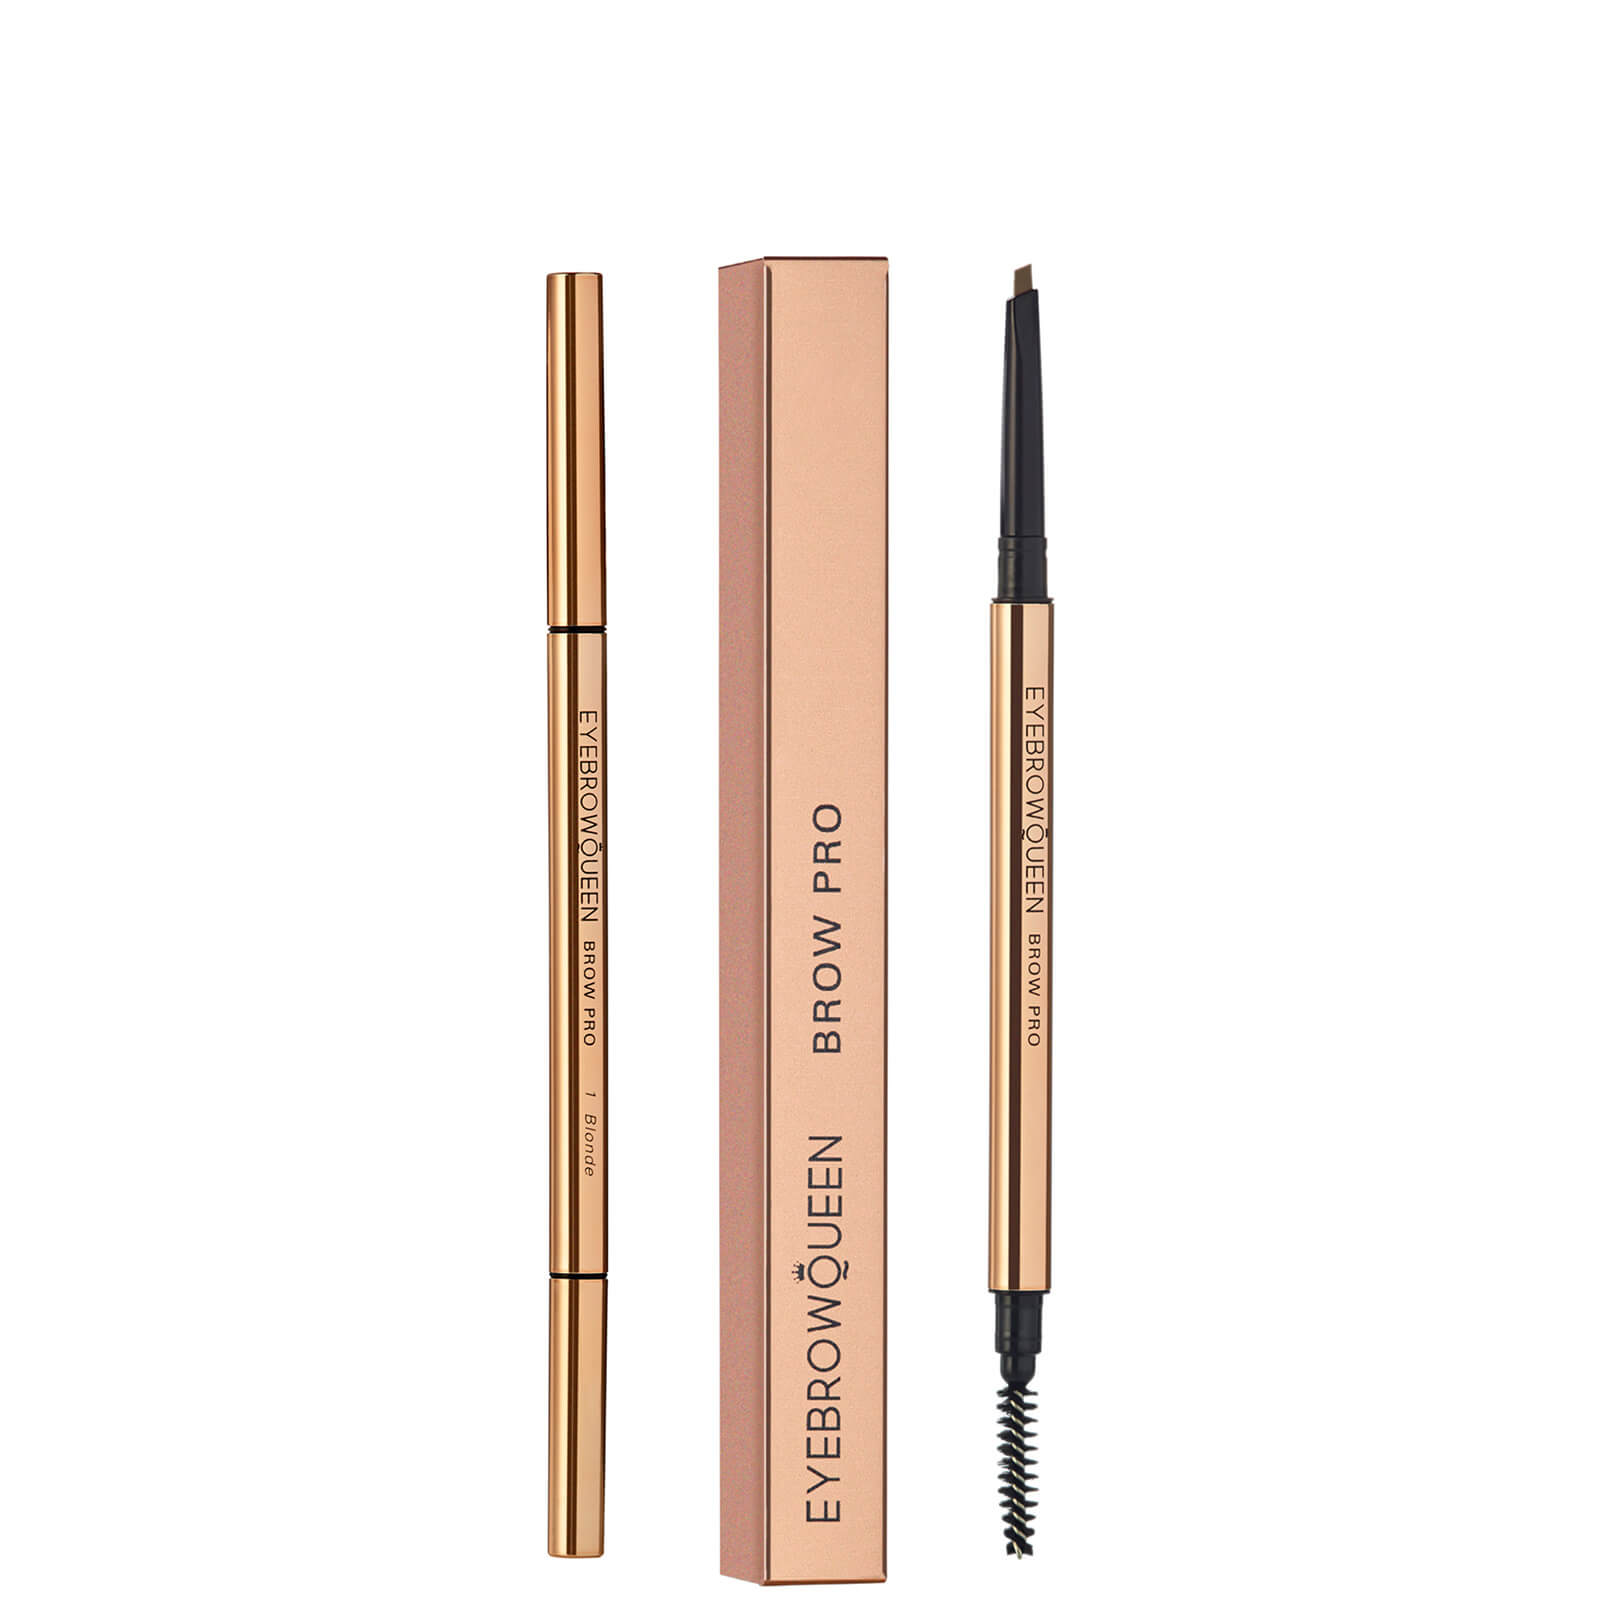 Image of Brow Pro Pencil EyebrowQueen 0,05g (varie tonalità) - Rich Brown